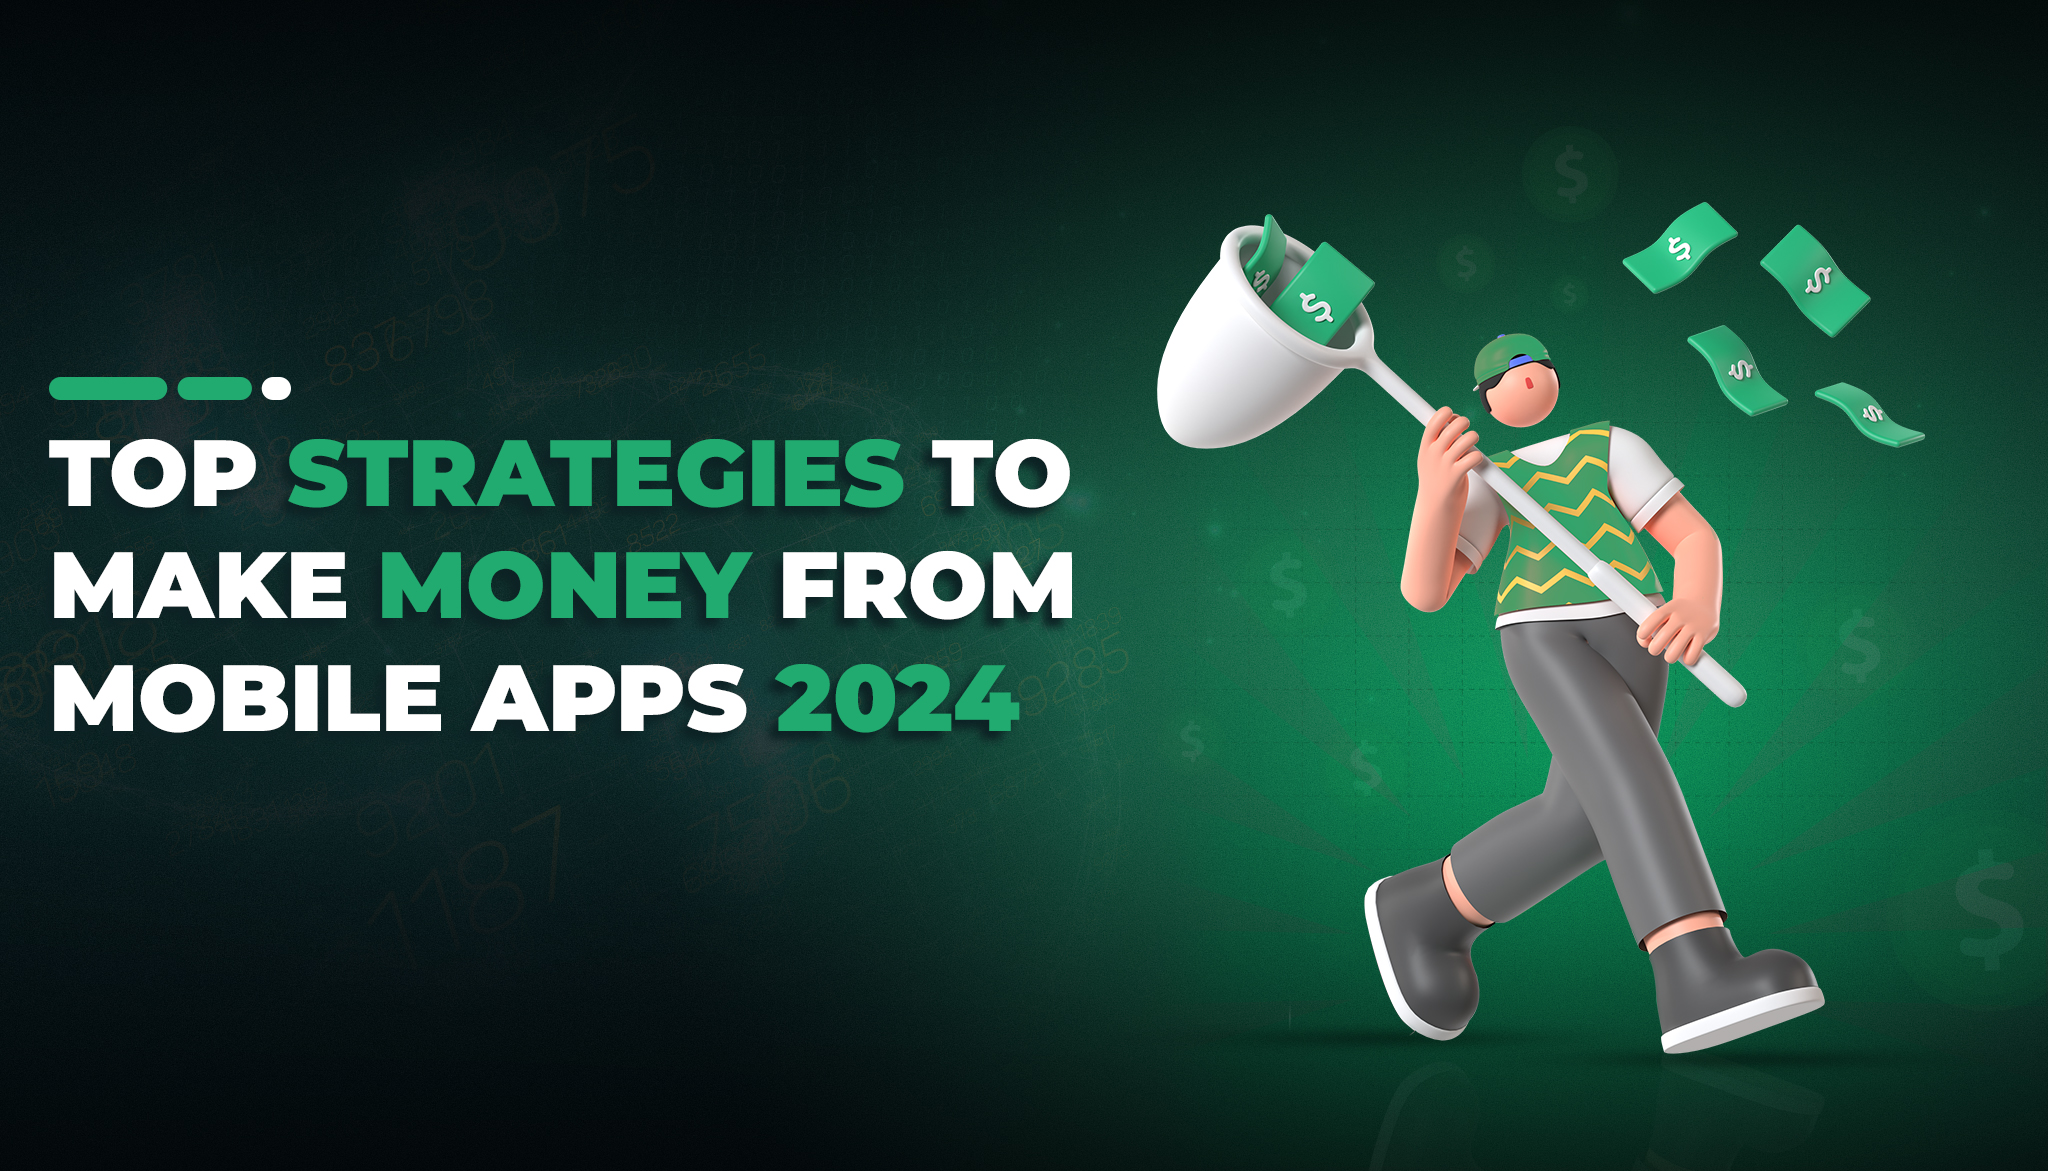 Top Strategies to Make Money From Mobile Apps 2024